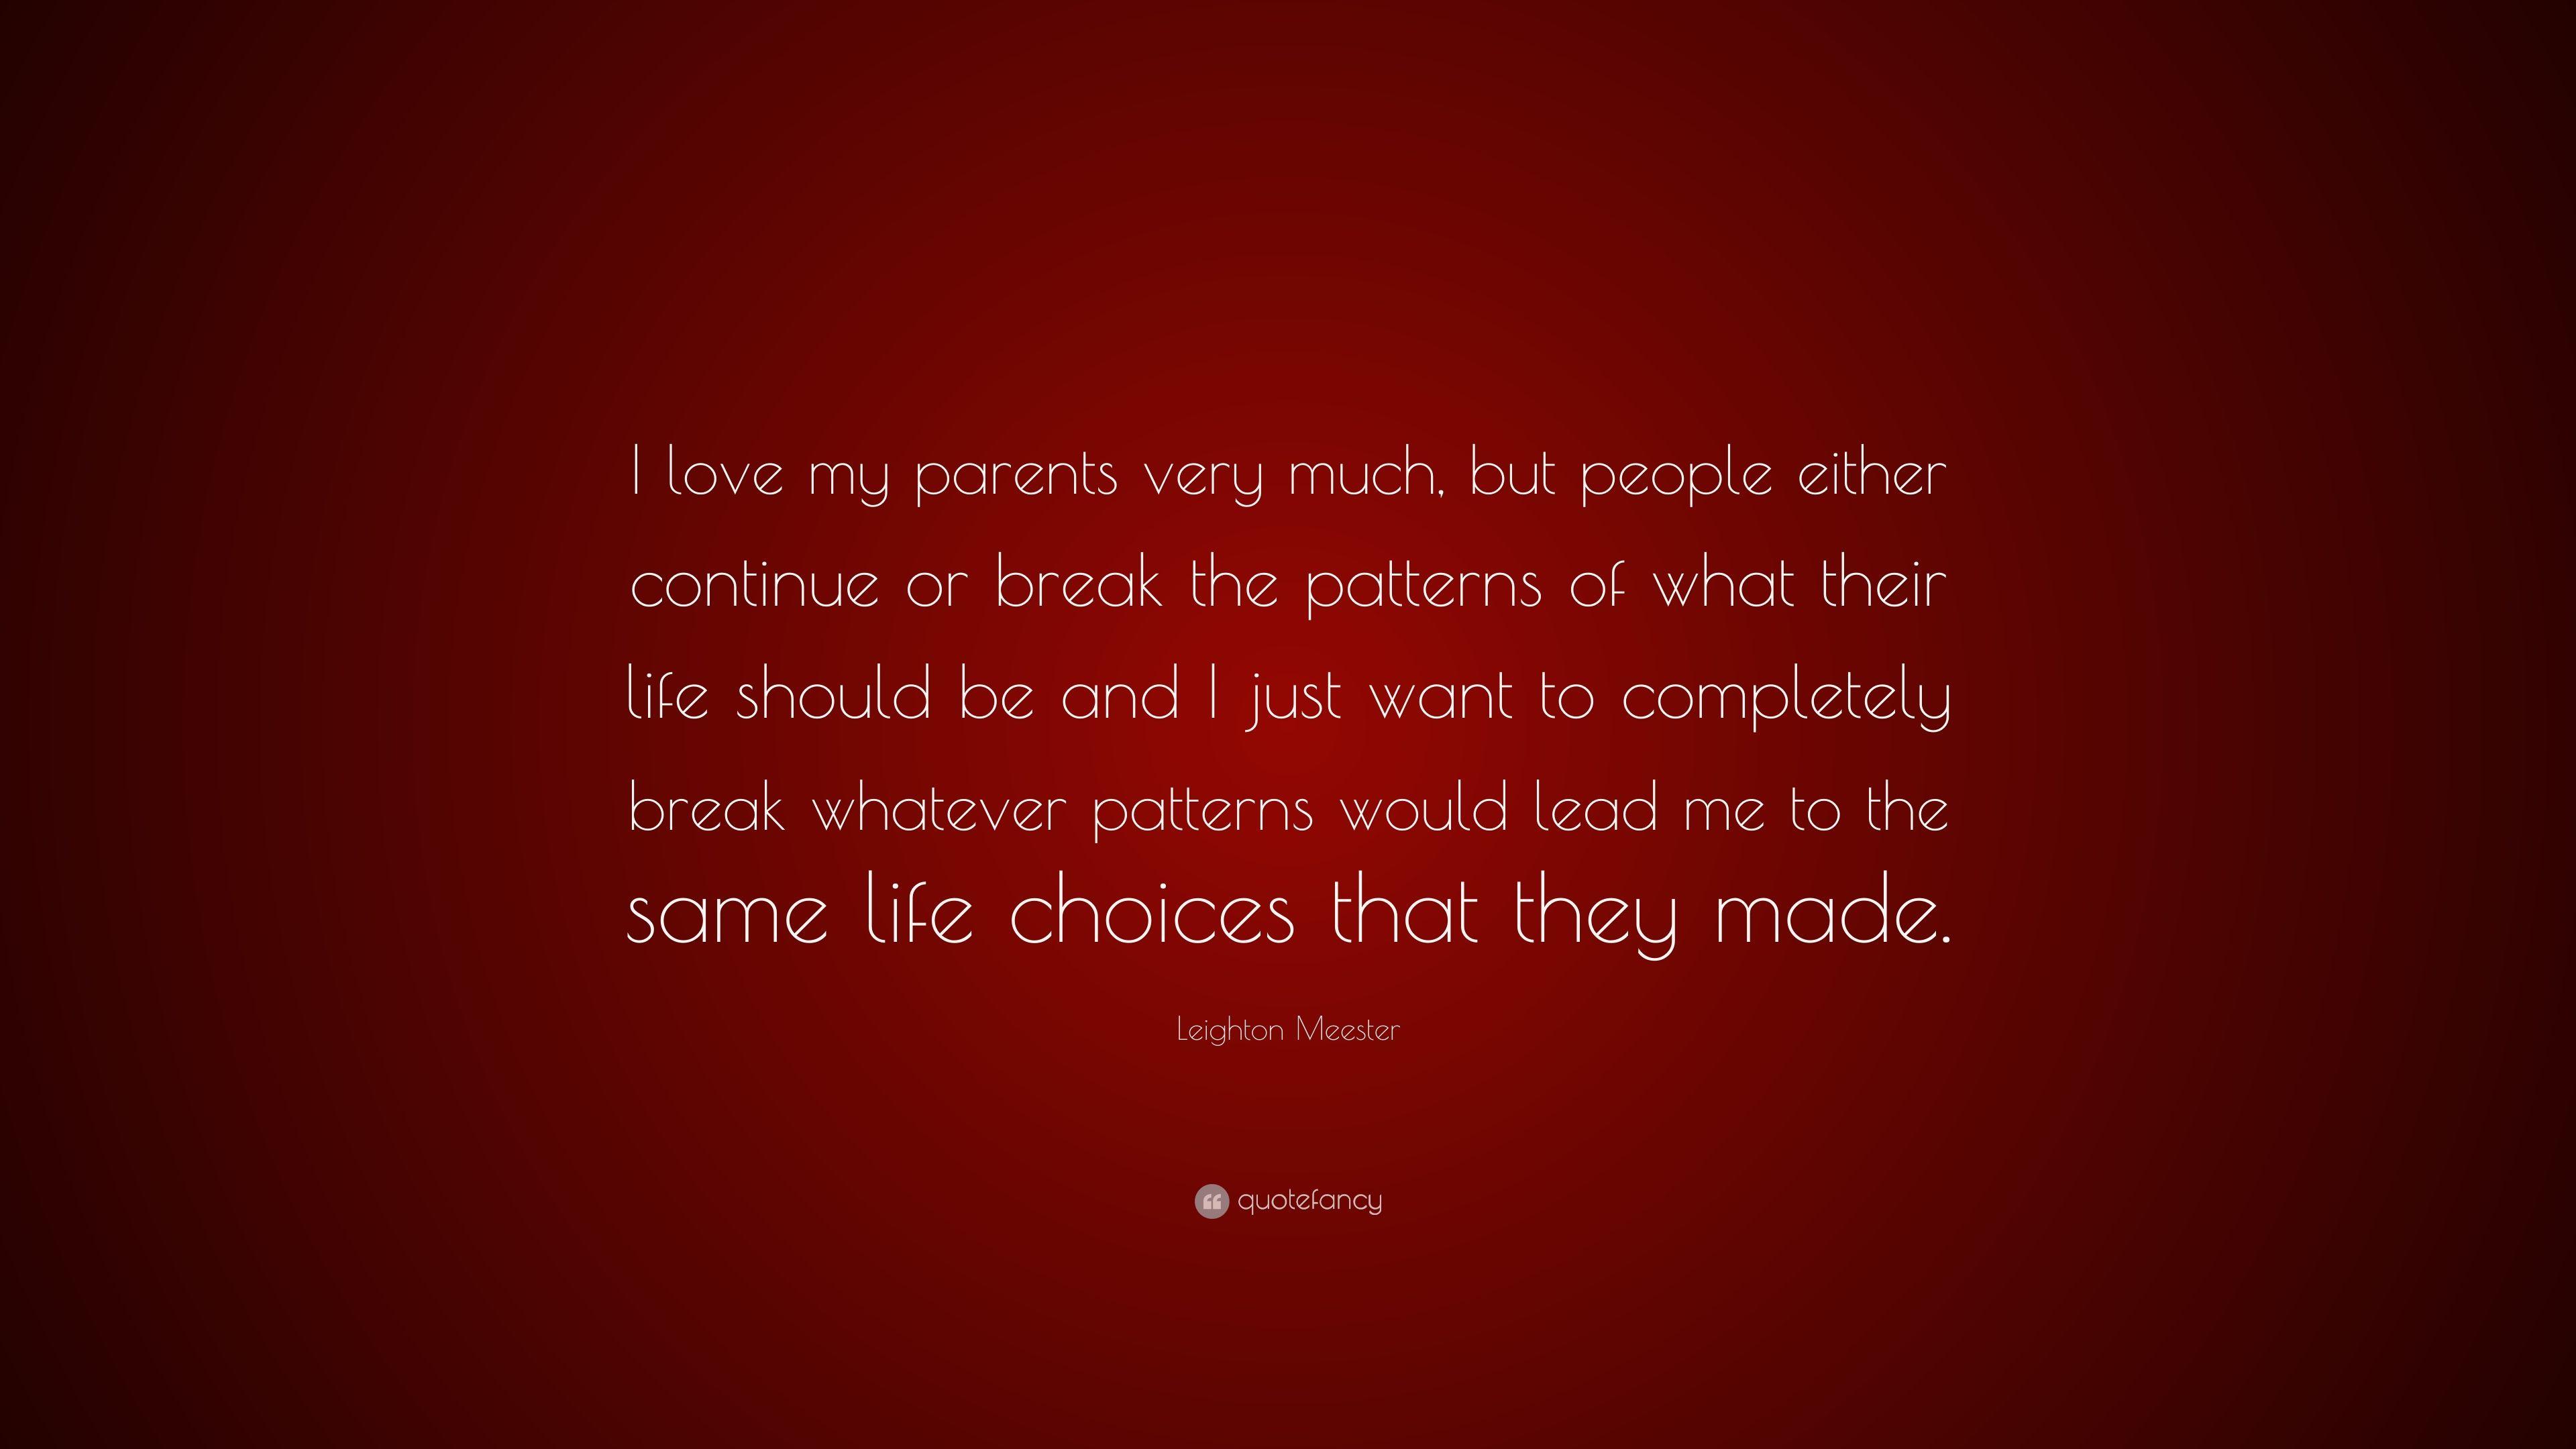 Leighton Meester Quote: “I love my parents very much, but people